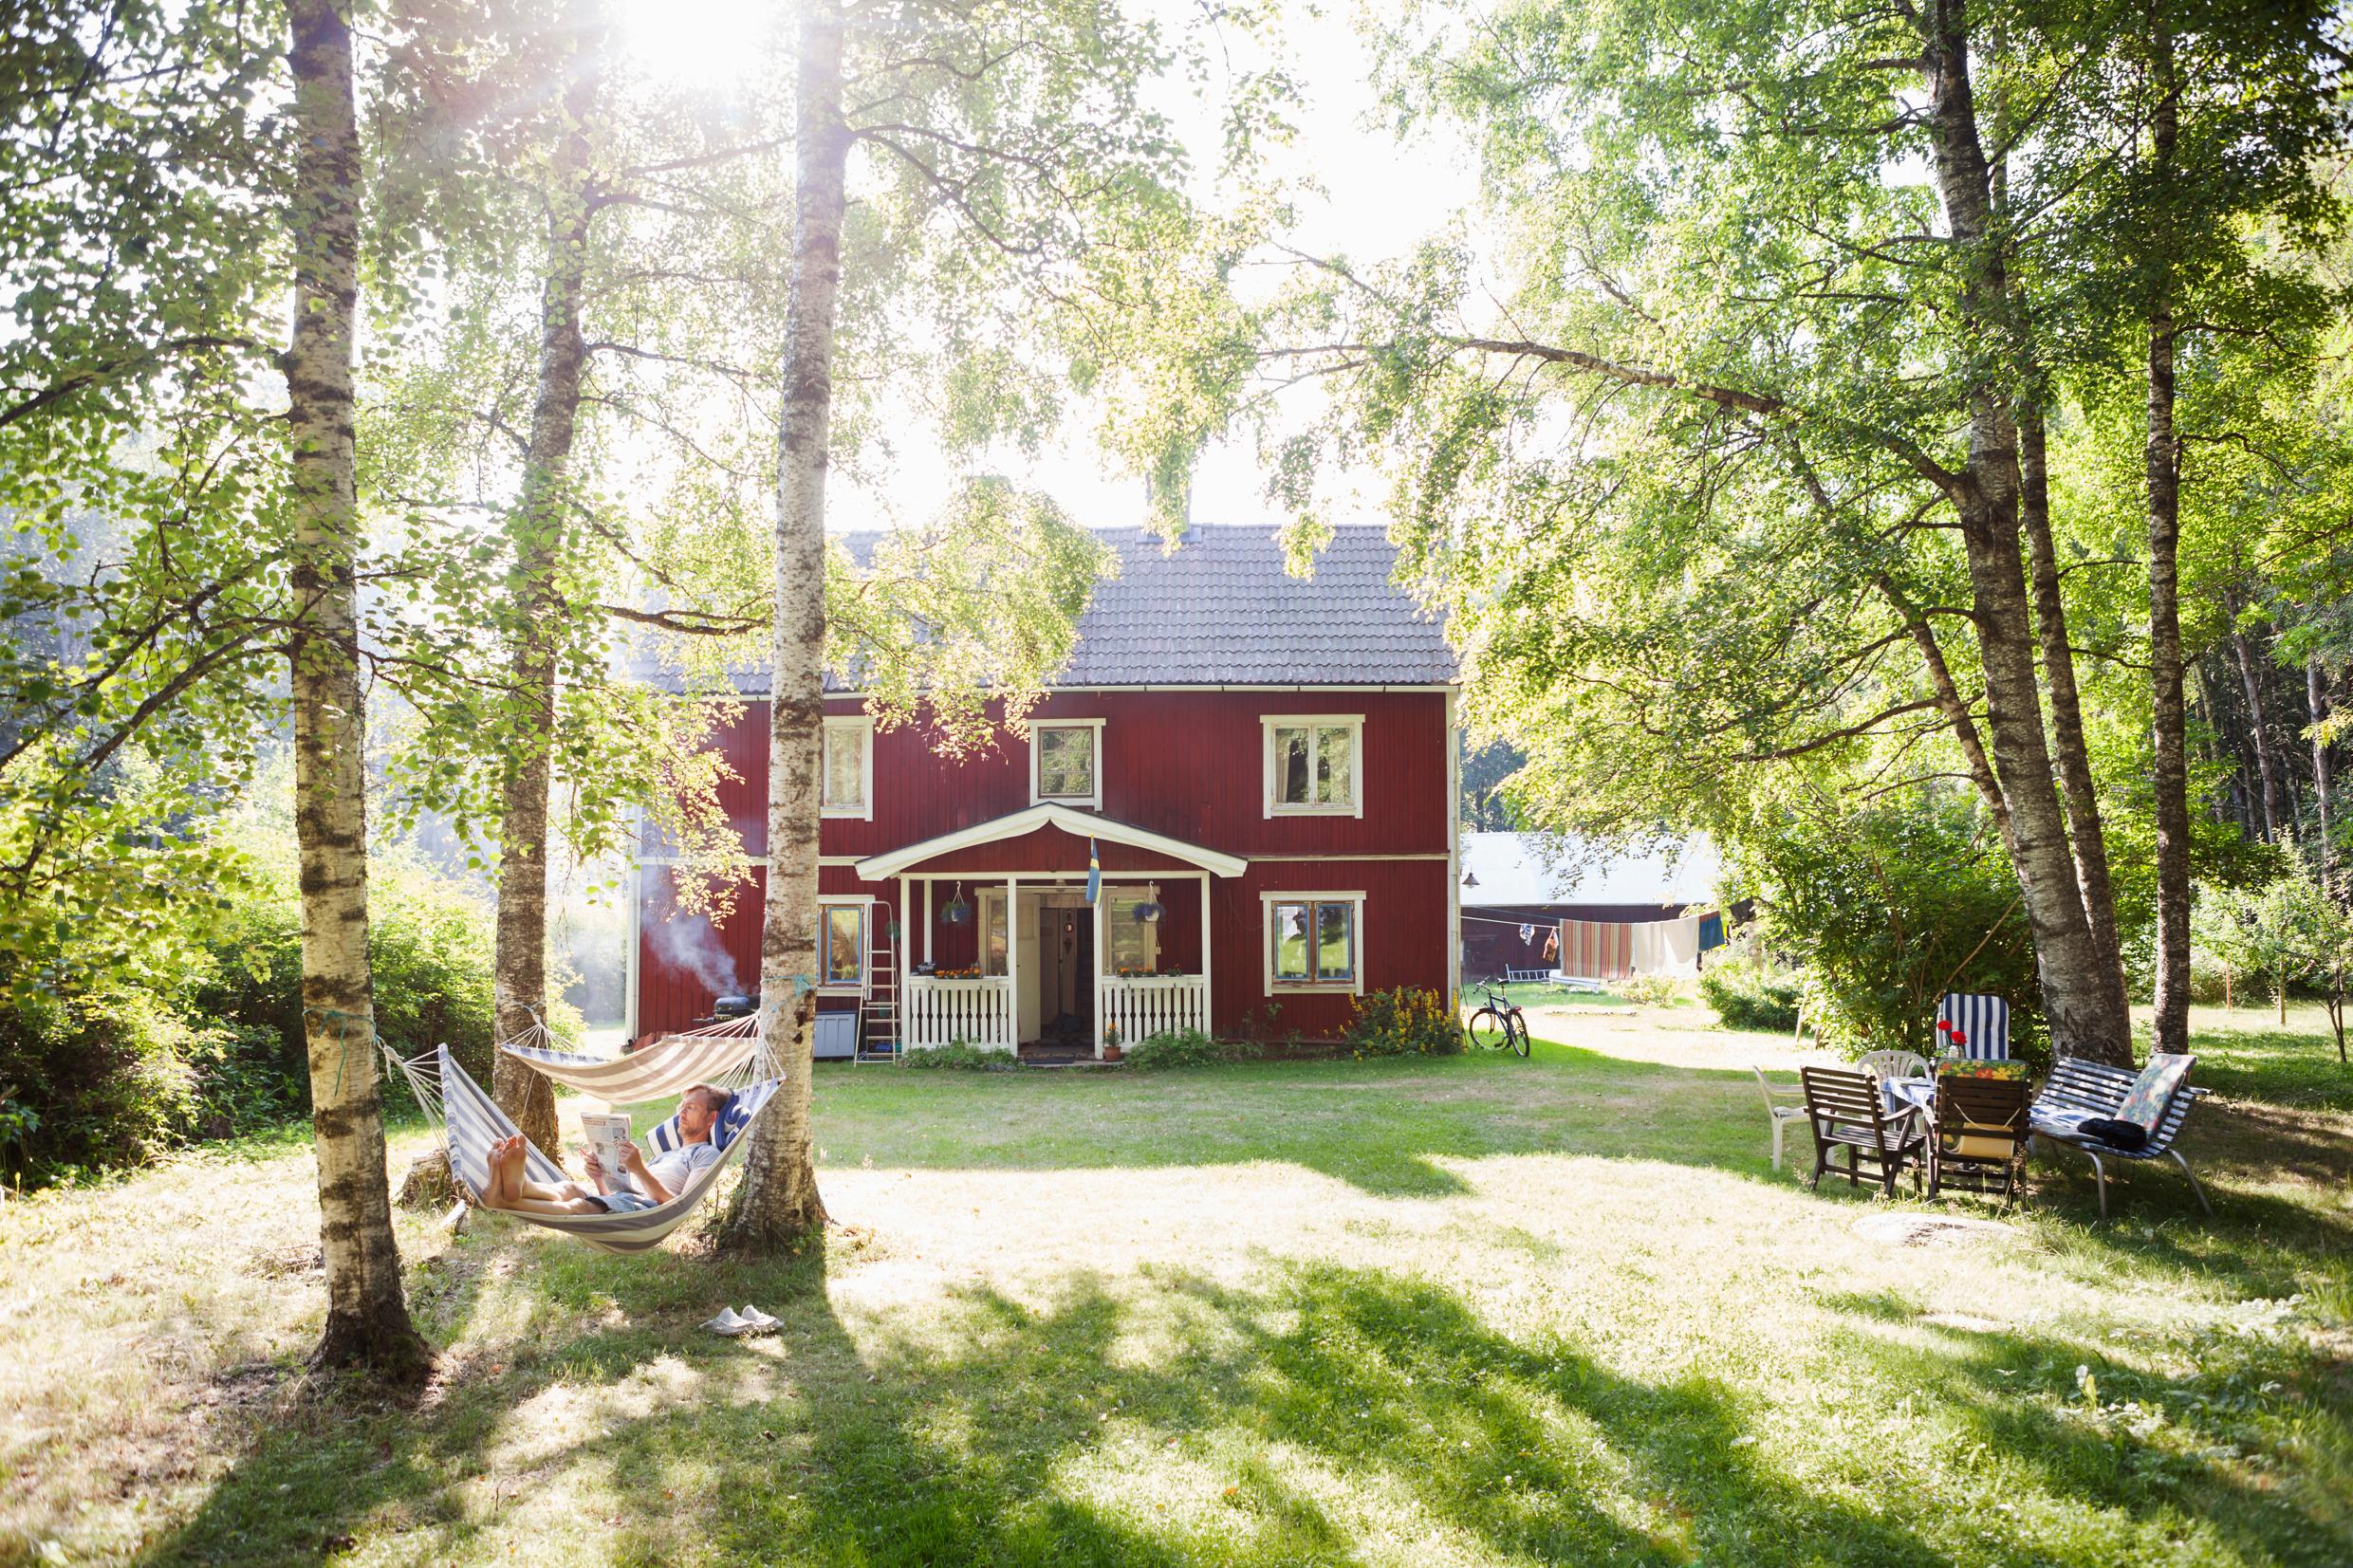 A garden in front of a traditional red Swedish house, with greenery, trees, hammocks and garden furniture.